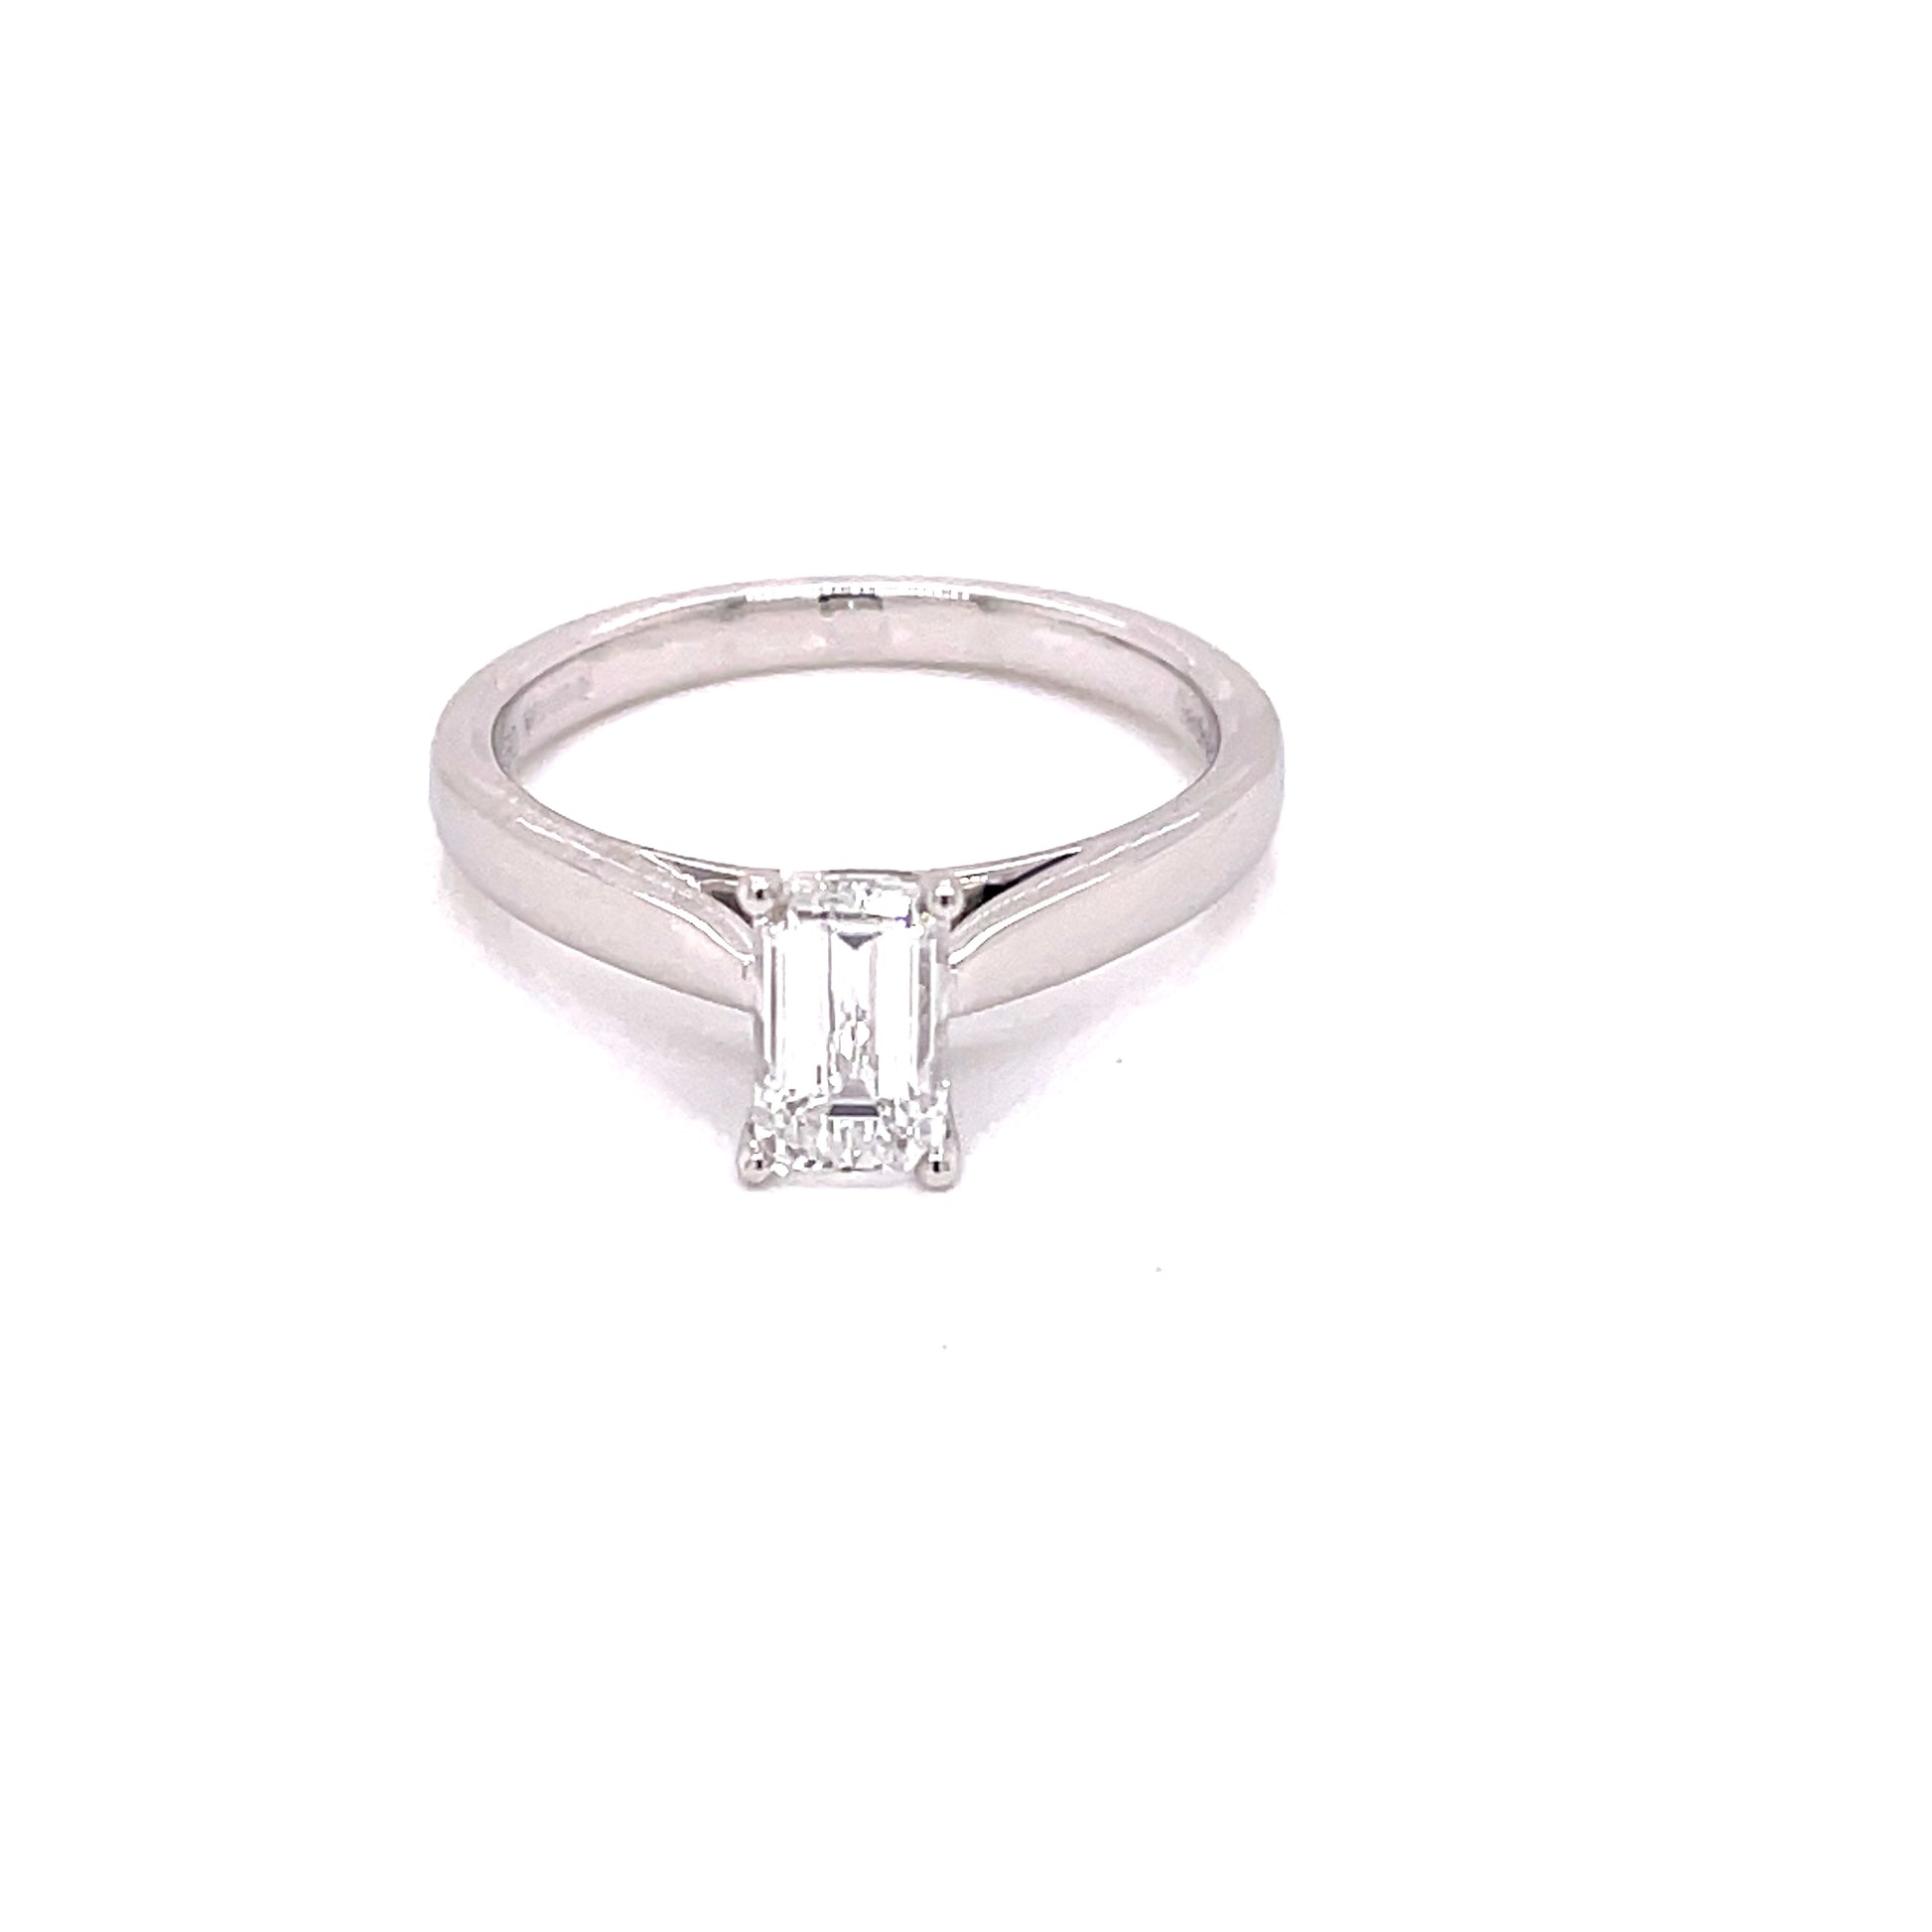 Emerald Cut Diamond Solitaire Ring - 1.01cts  Gardiner Brothers   